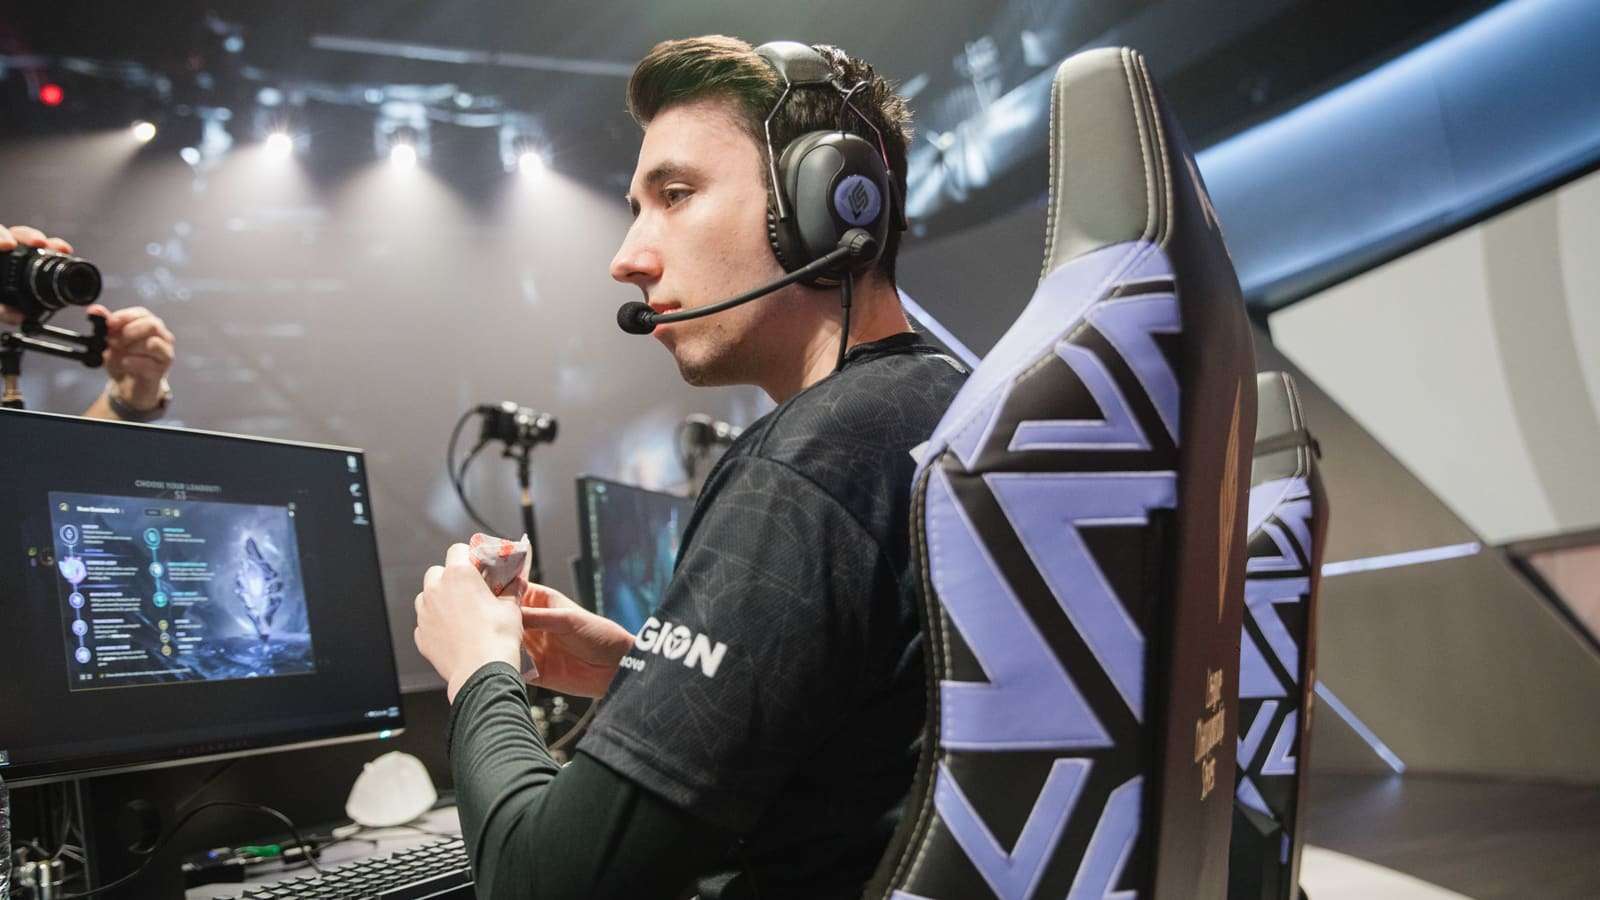 PowerOfEvil playing League of Legends for TSM on the LCS 2021 Summer stage in Los Angeles.